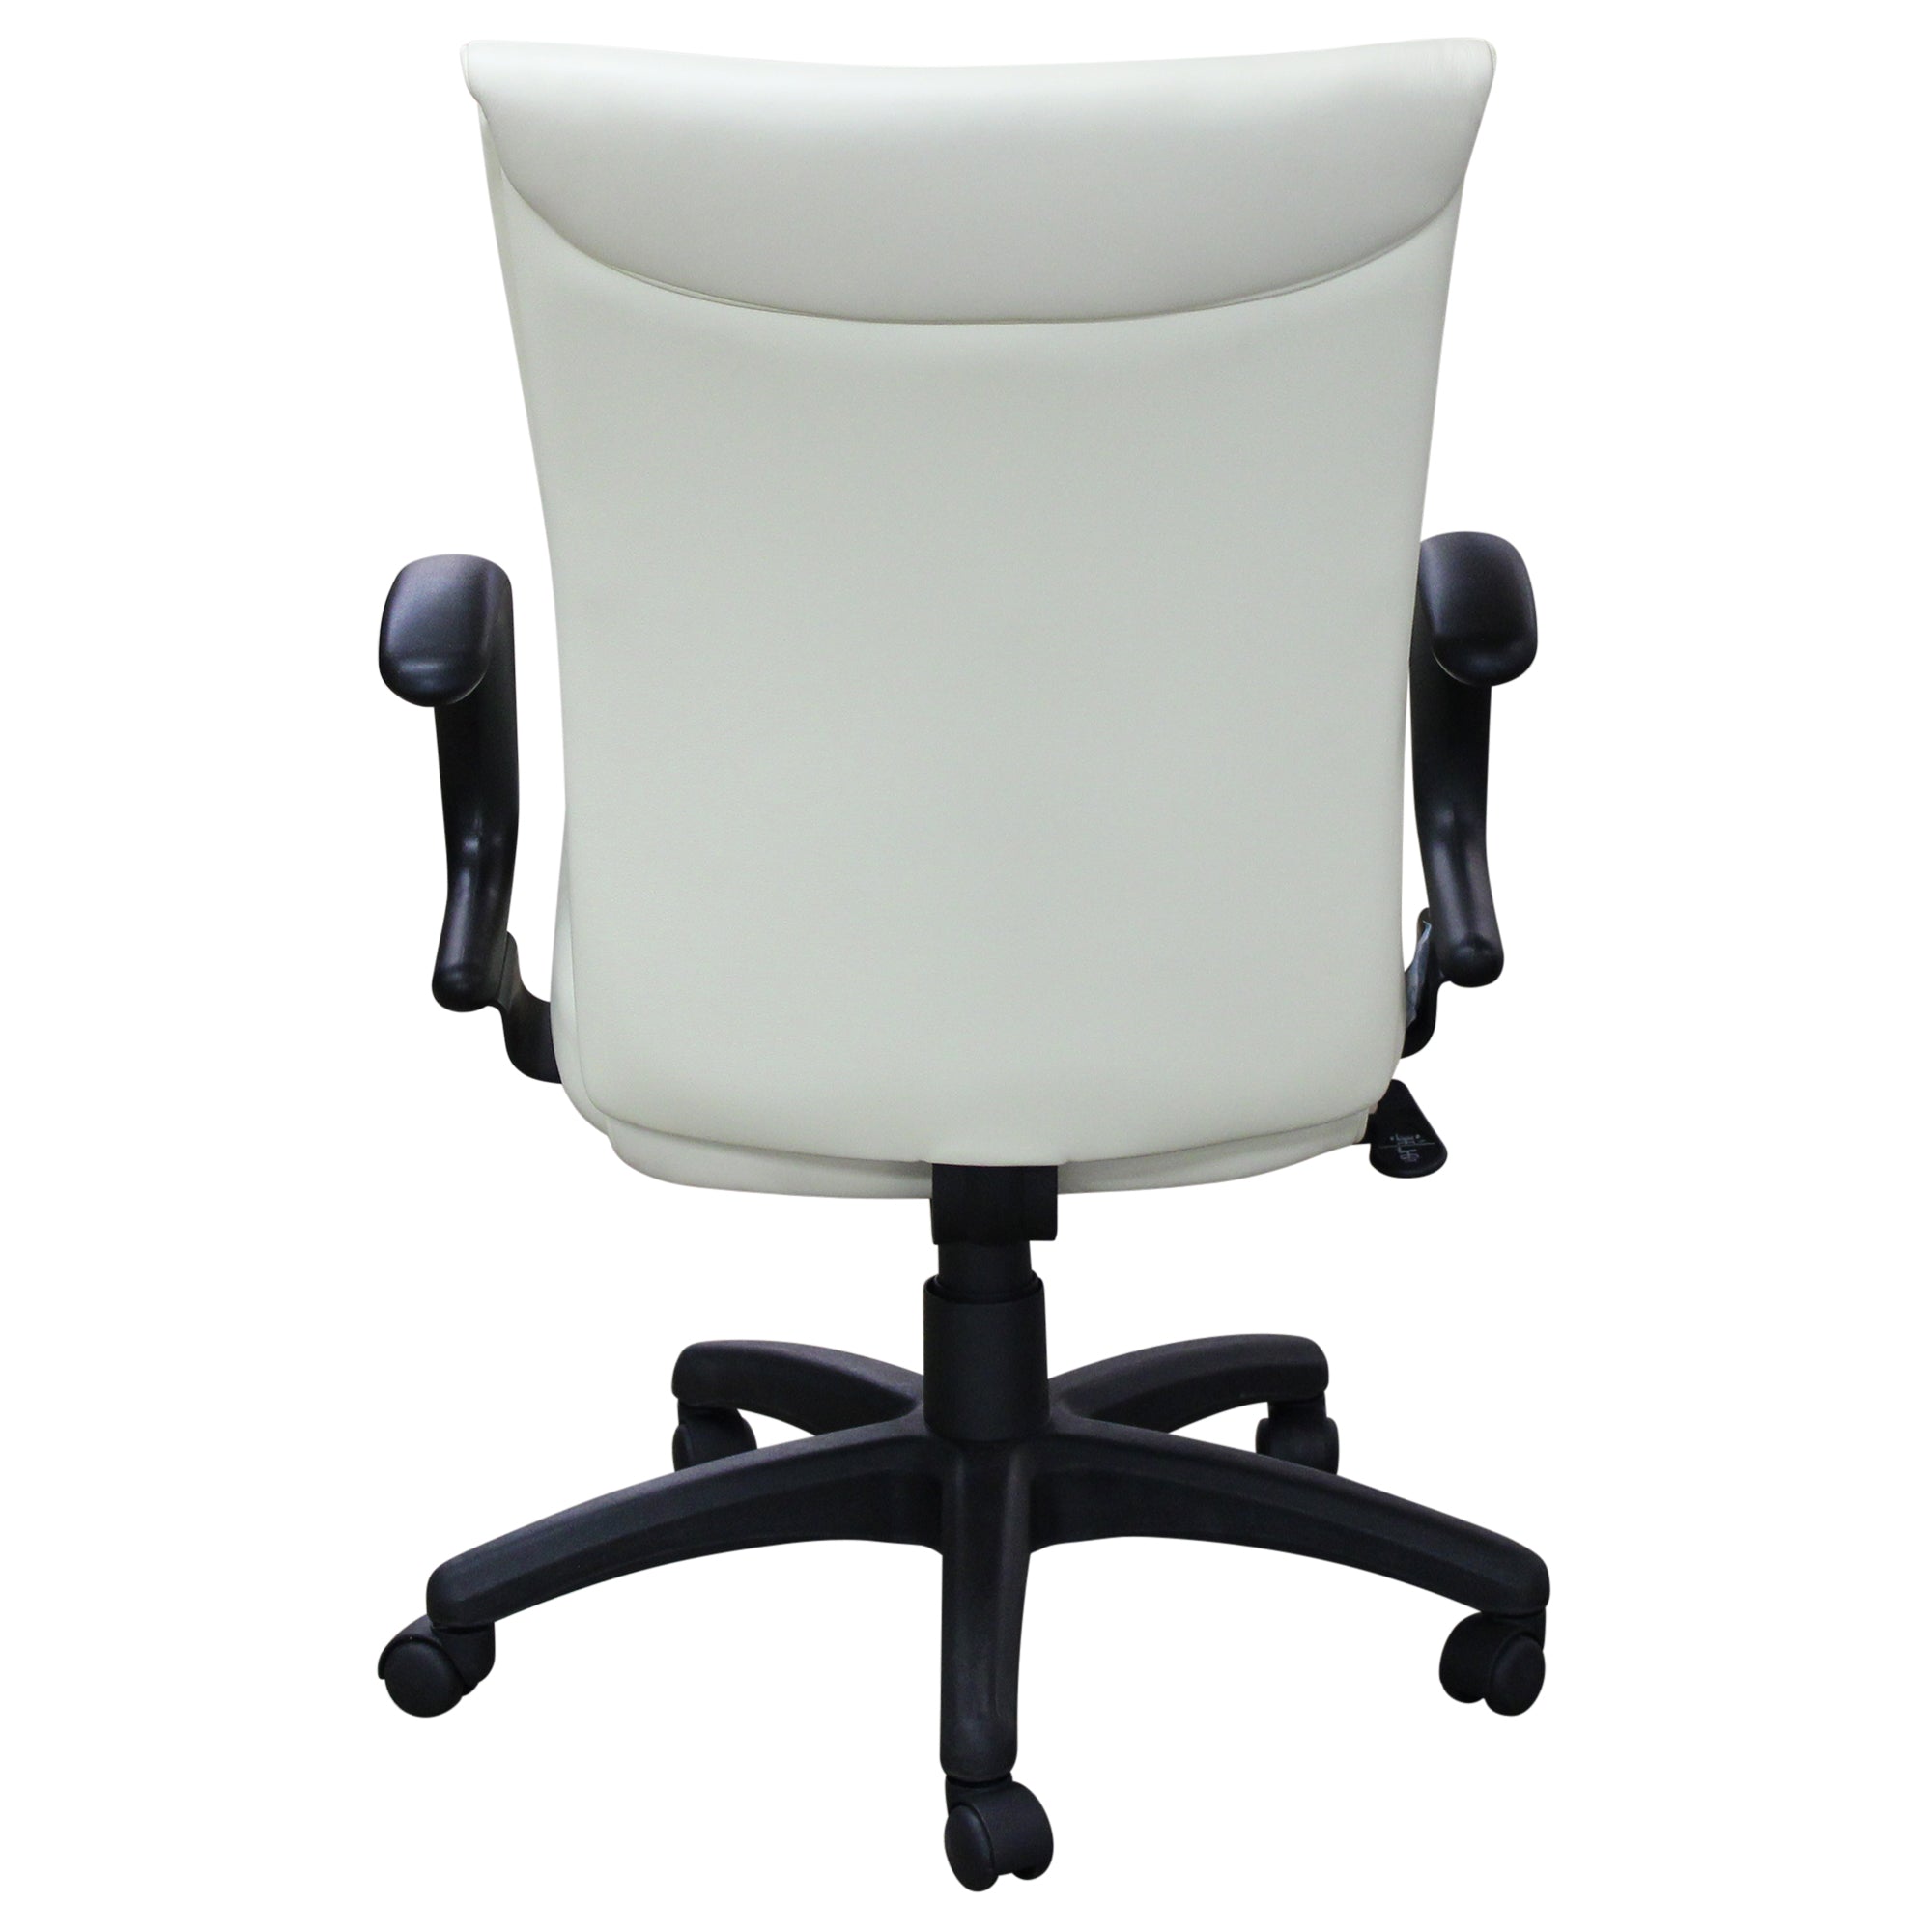 Compel Zen Conference Chair, Pearl - New CLOSEOUT